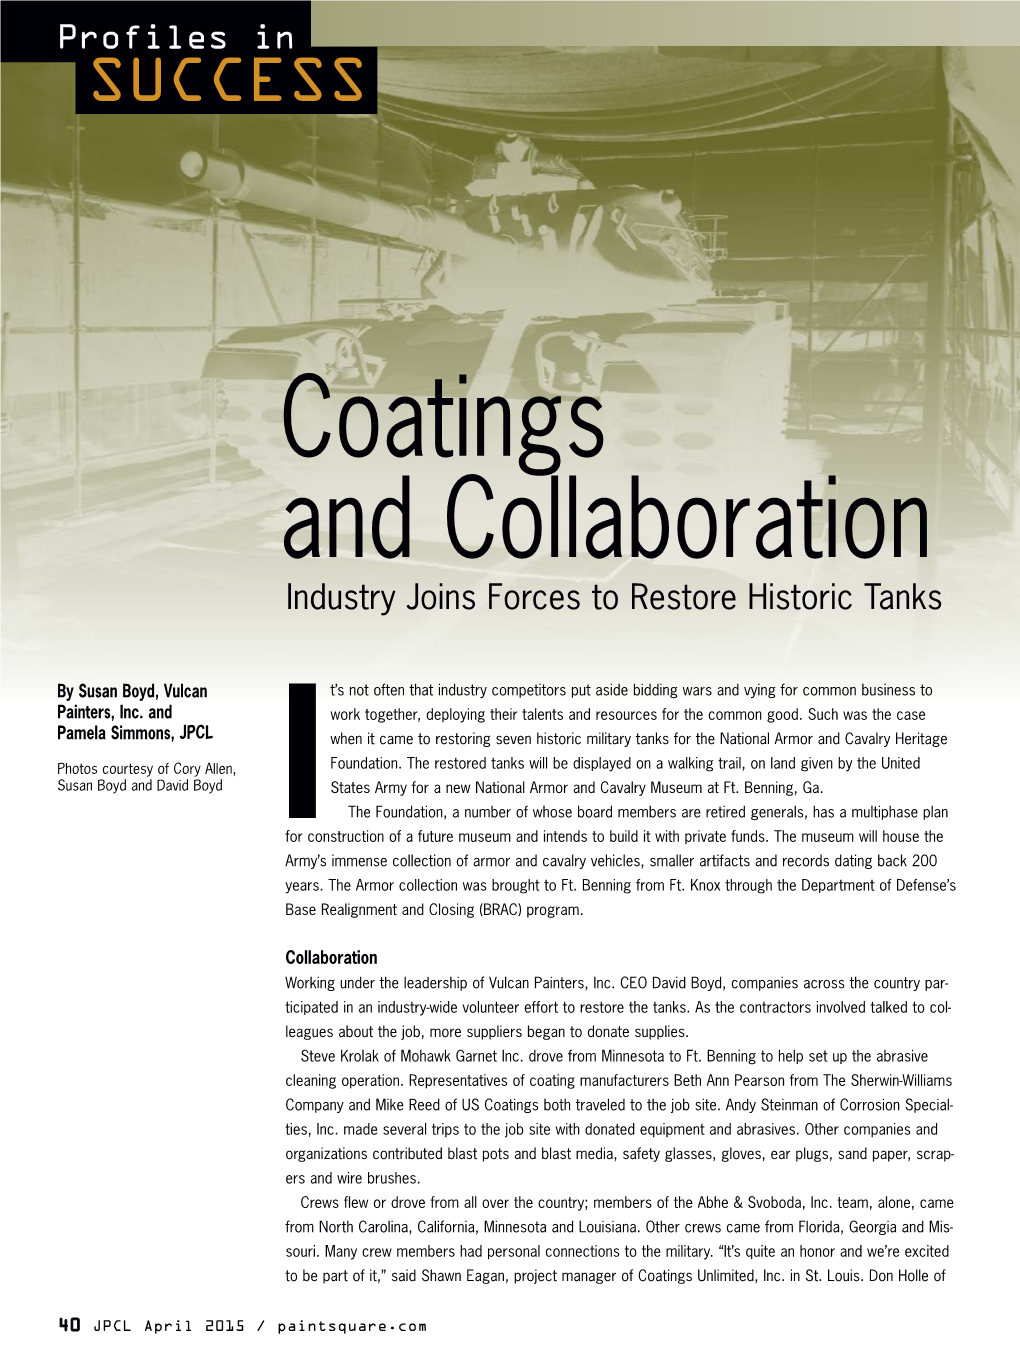 Coatings and Collaboration Industry Joins Forces to Restore Historic Tanks